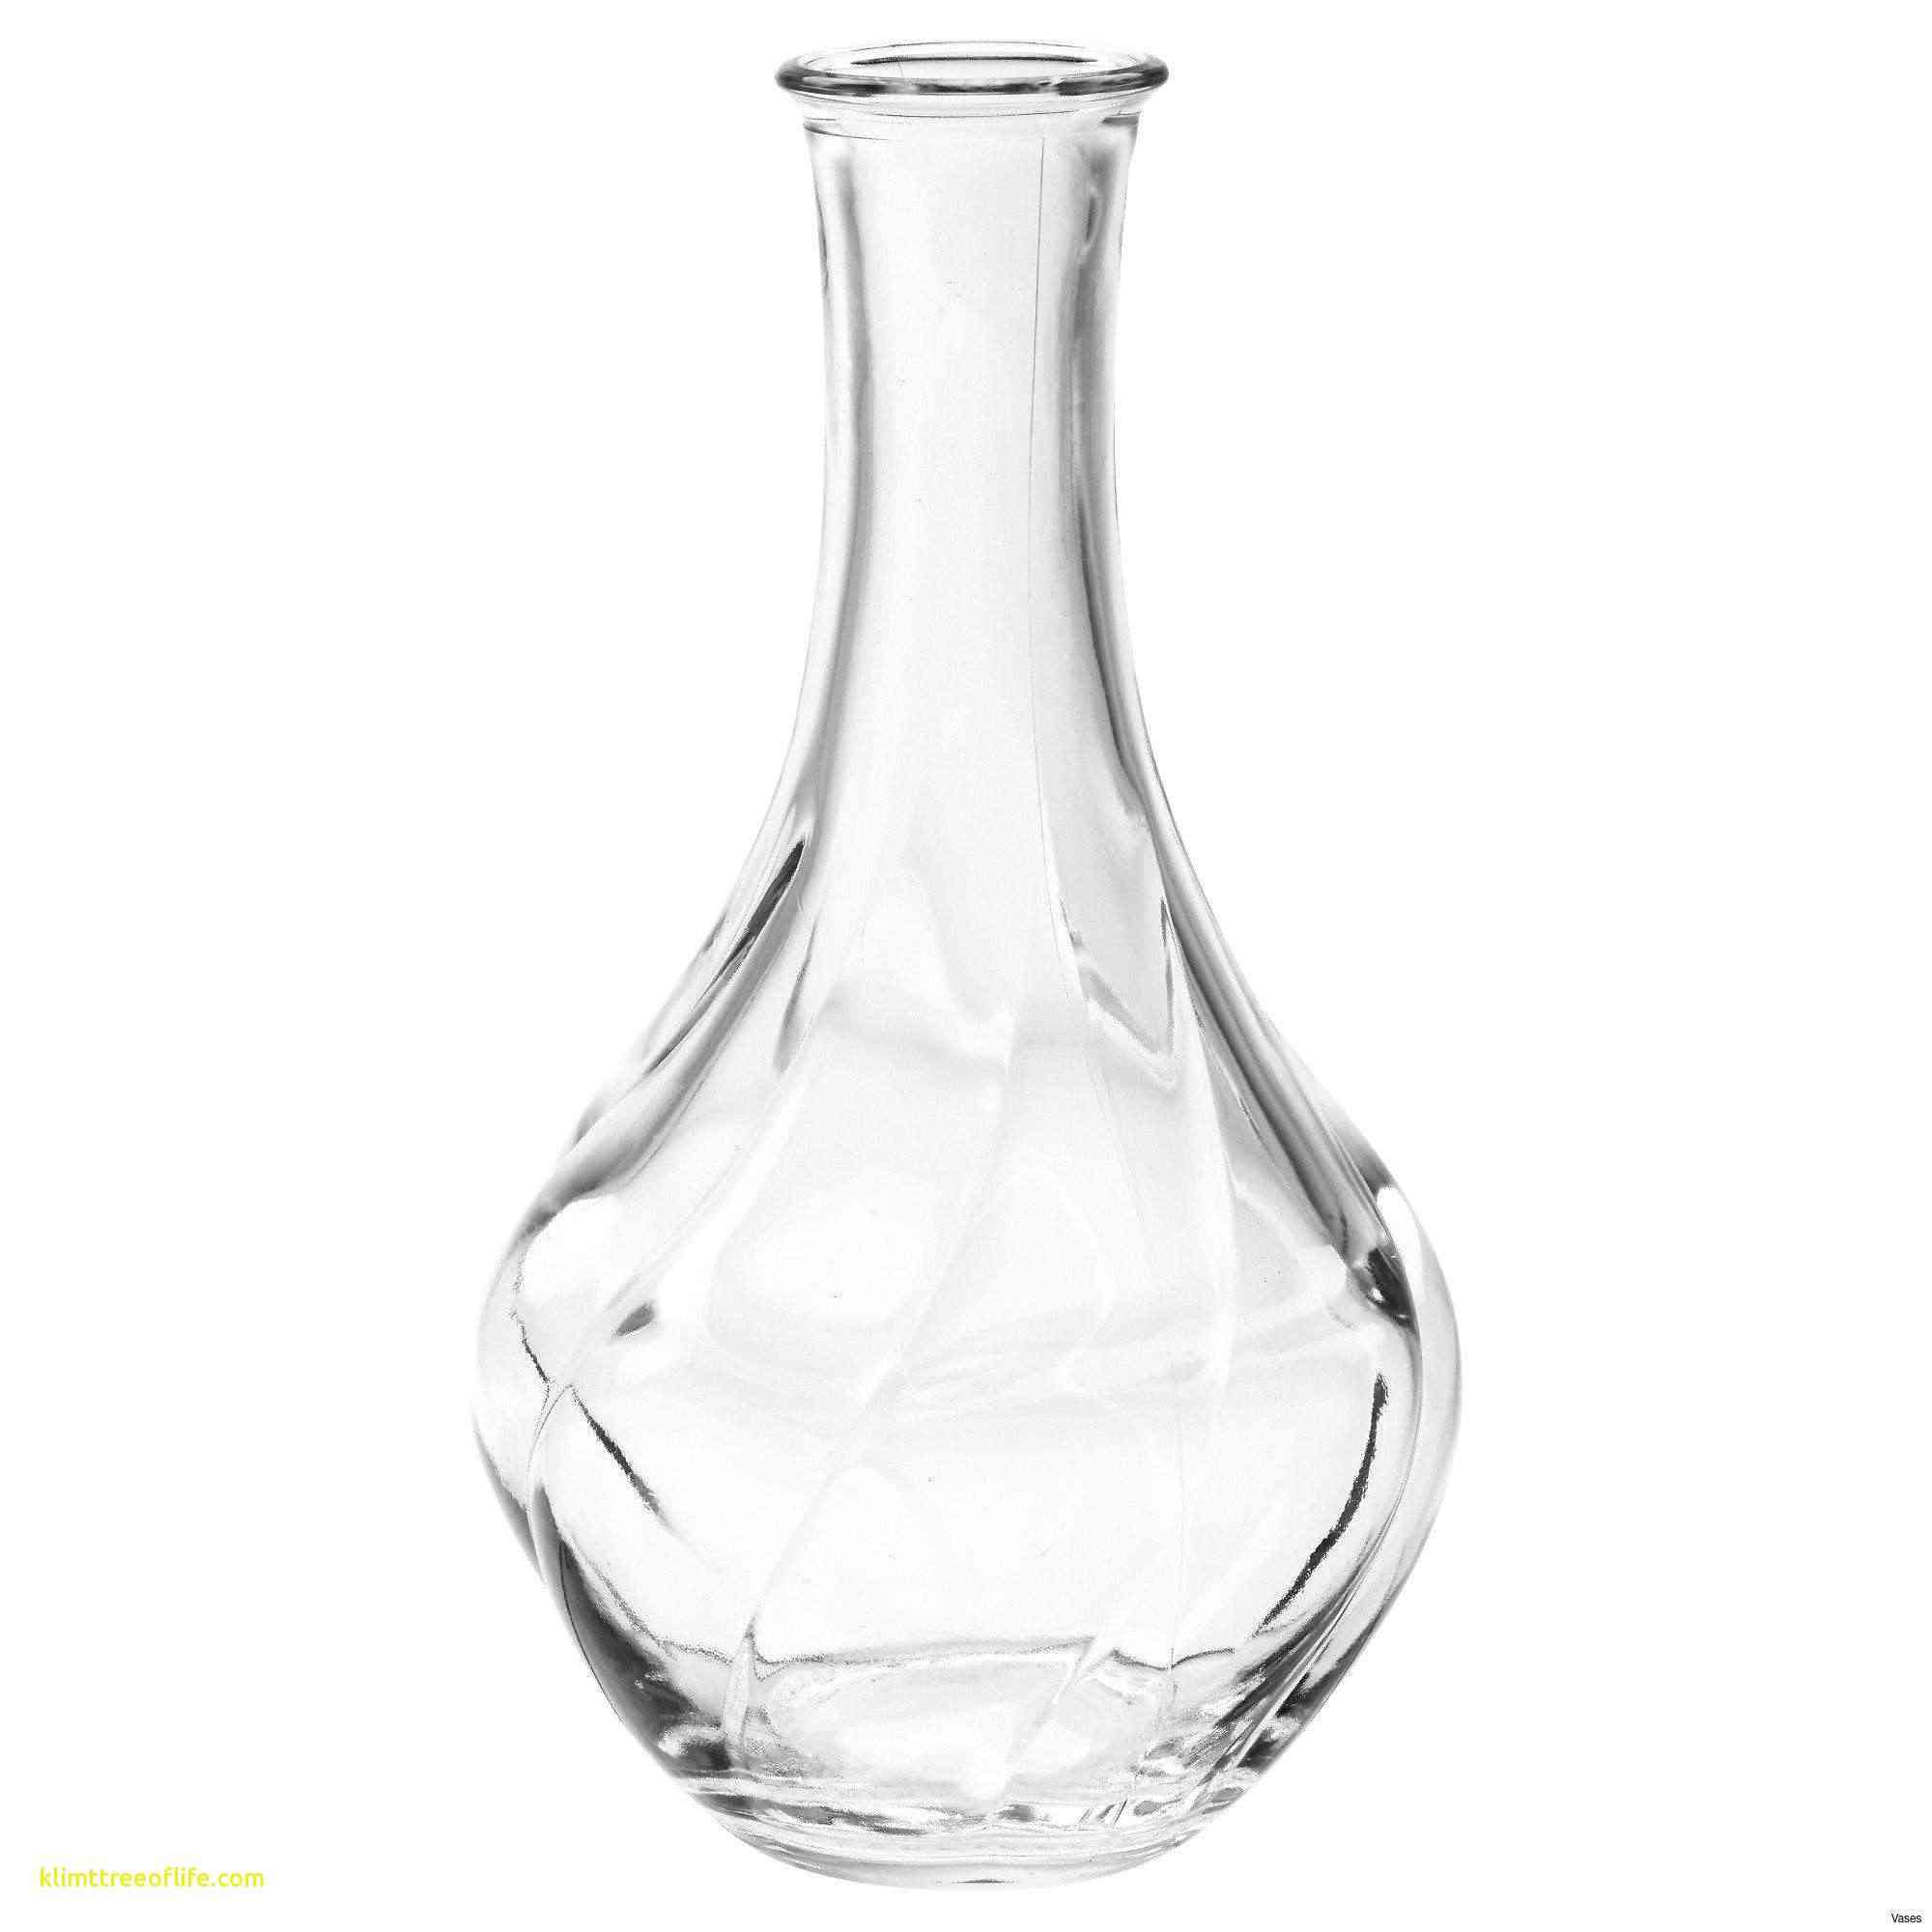 stony creek lighted vases of wide glass vase image paint a picture luxury h vases paint vase i 0d inside wide glass vase images paint a picture luxury h vases paint vase i 0d with glue